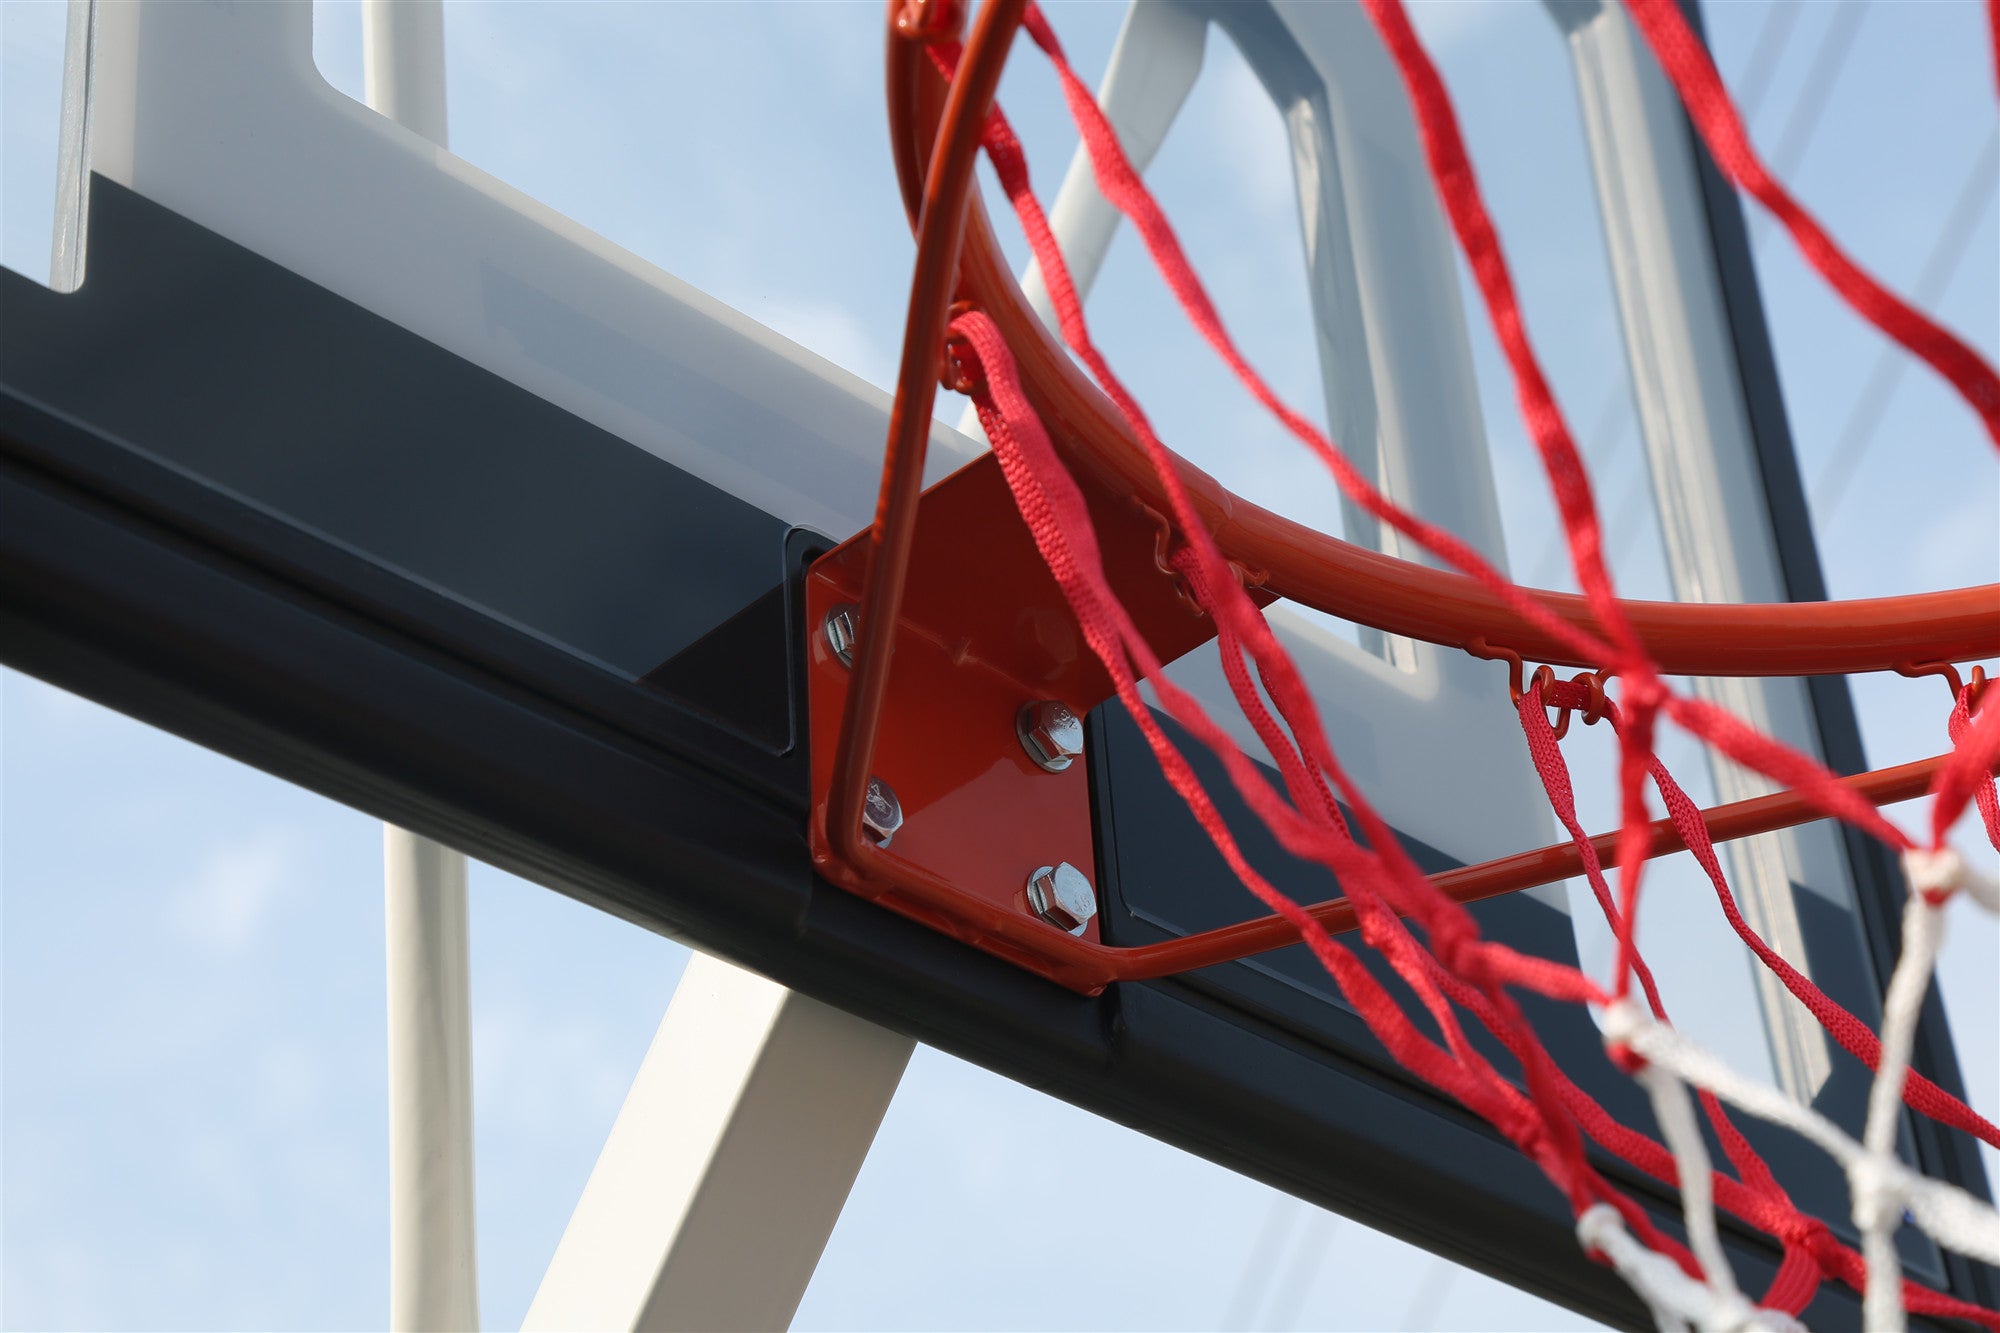 Xtreetball Basketball Hoop Stand System-X034 2.6M